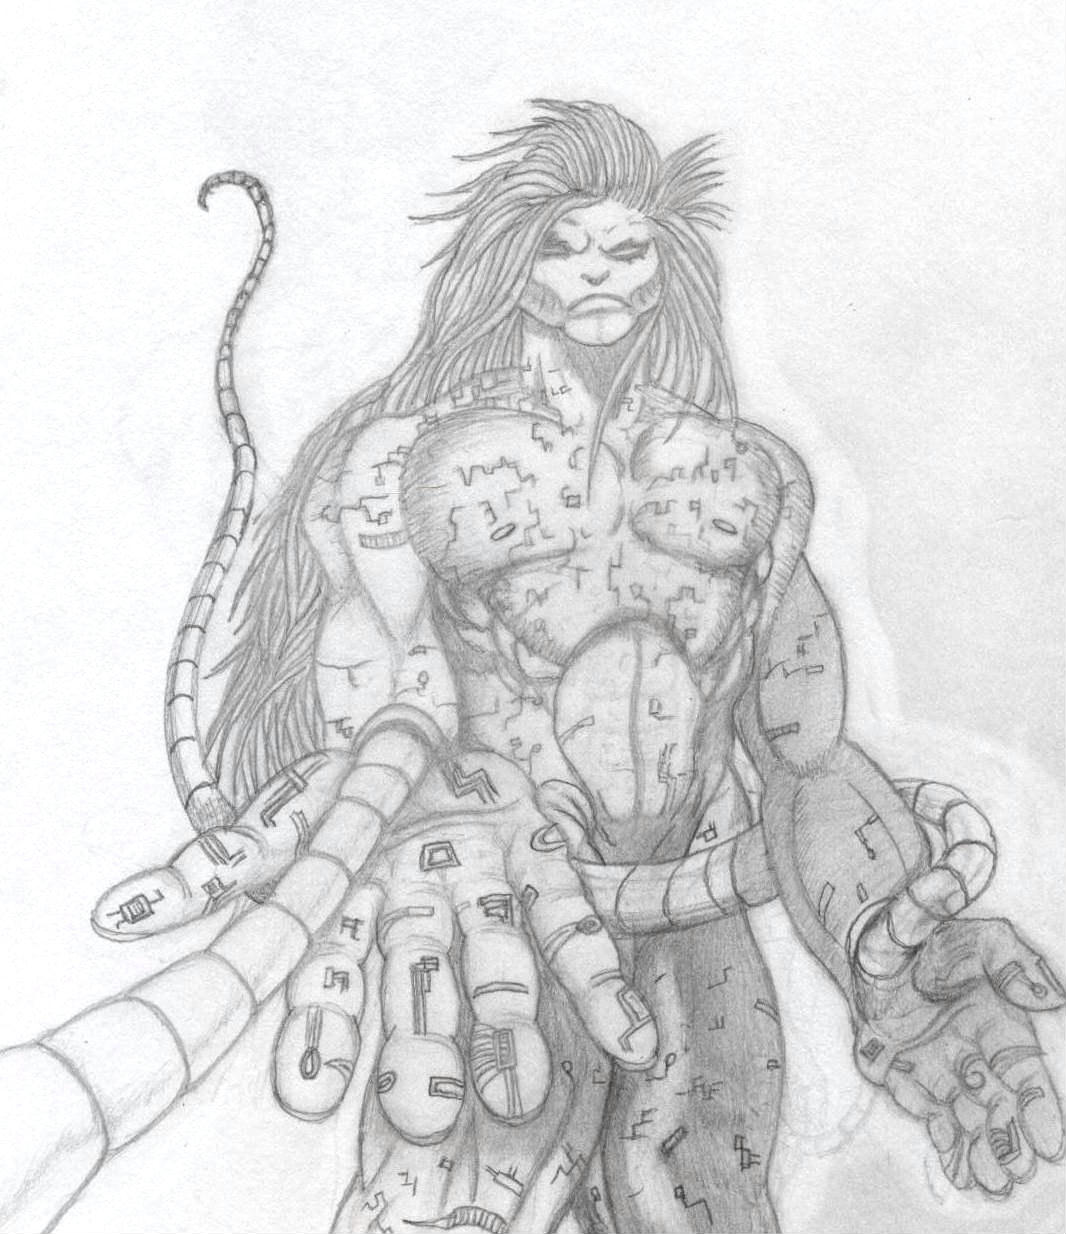 Omega Red redone by Ran_The_Hyena